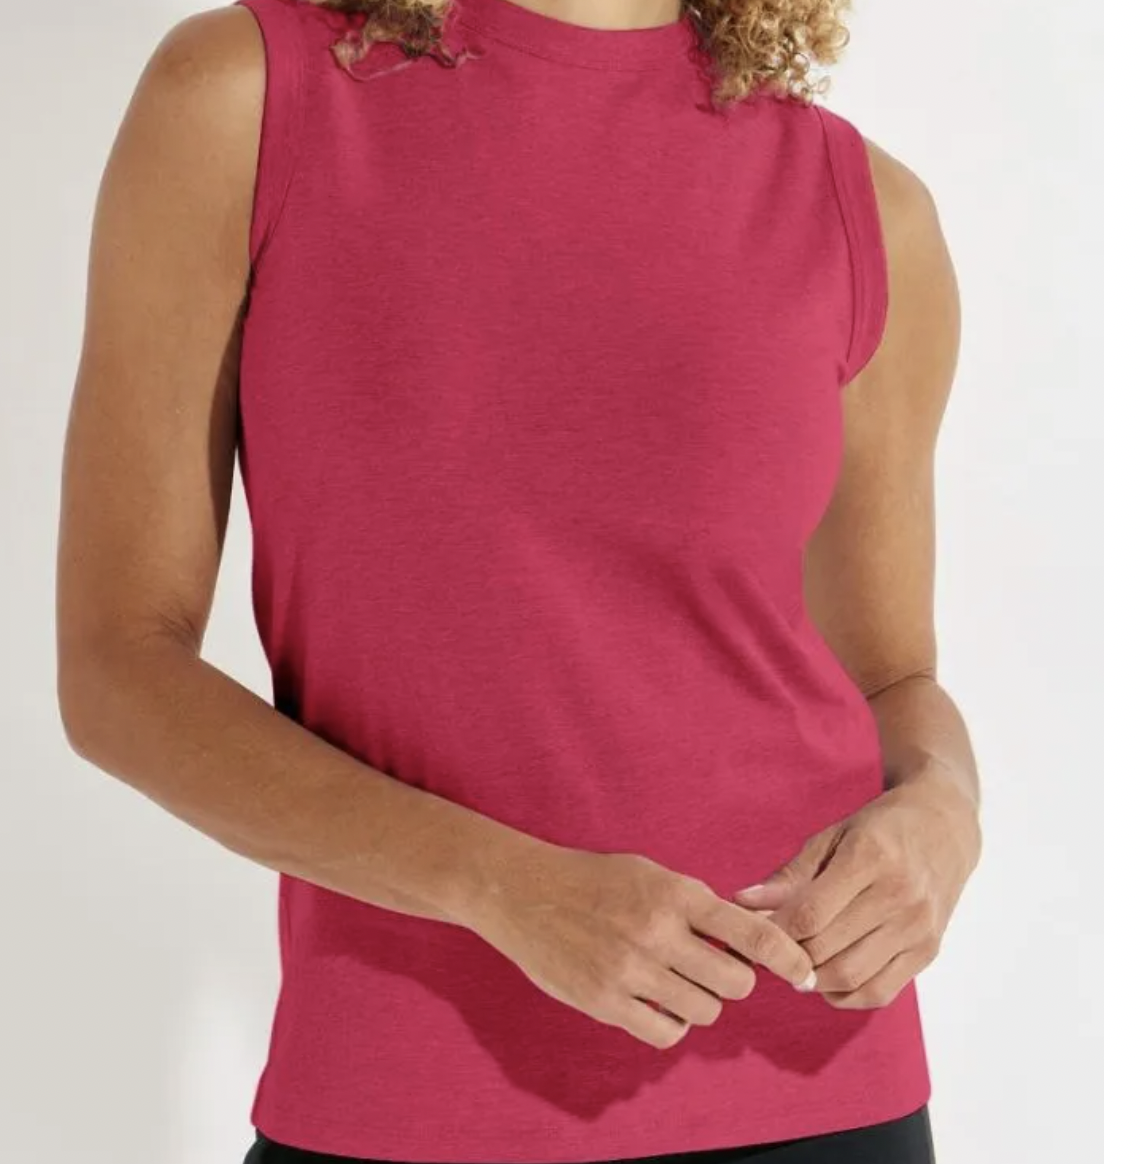 UPF 50+ Sun Protective Tank Top For Women